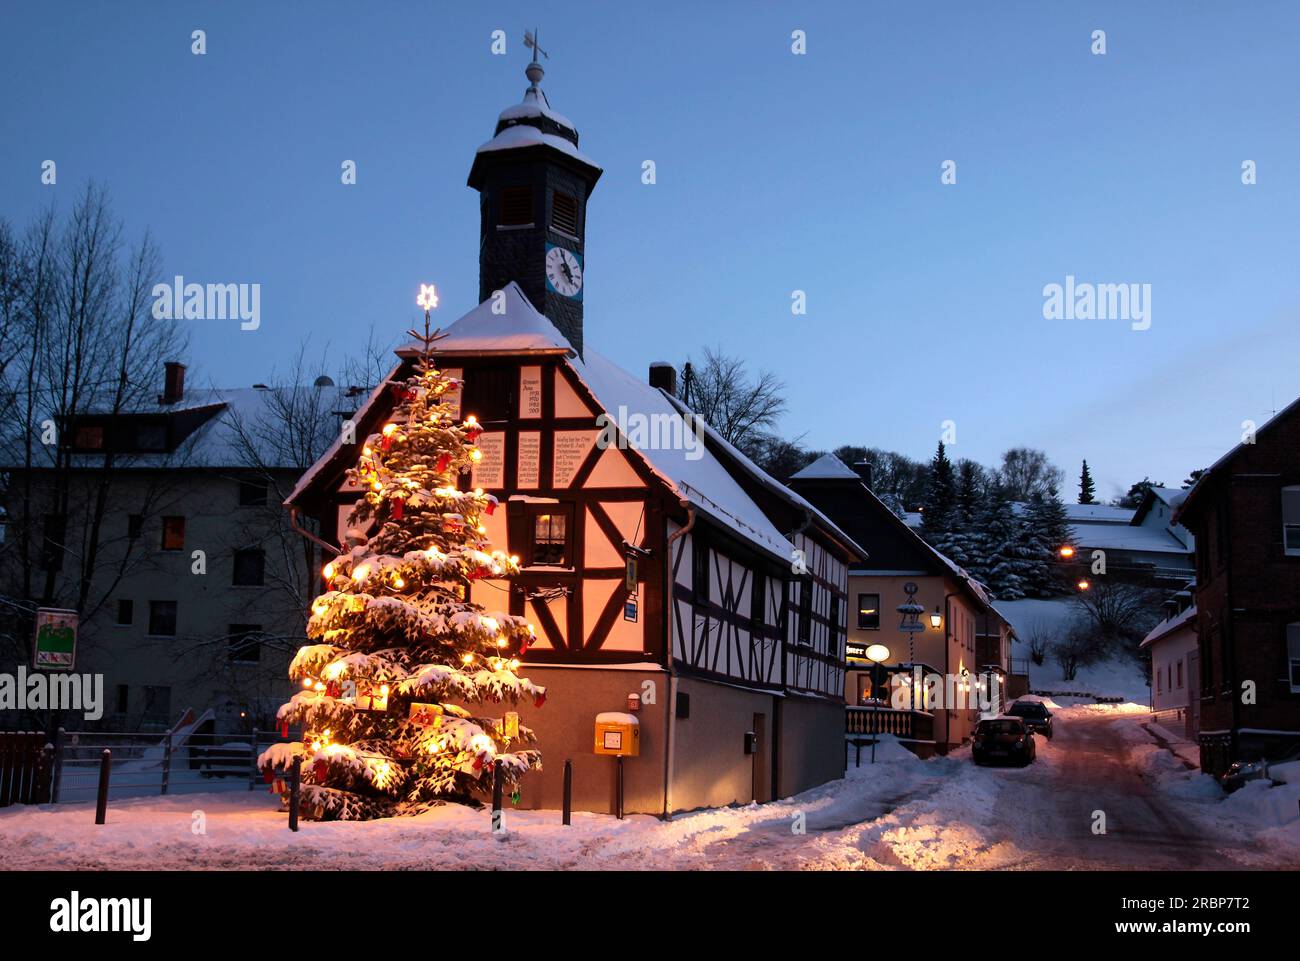 The old town hall of Engenhahn with Christmas tree, Niedernhausen, Hesse, Germany Stock Photo